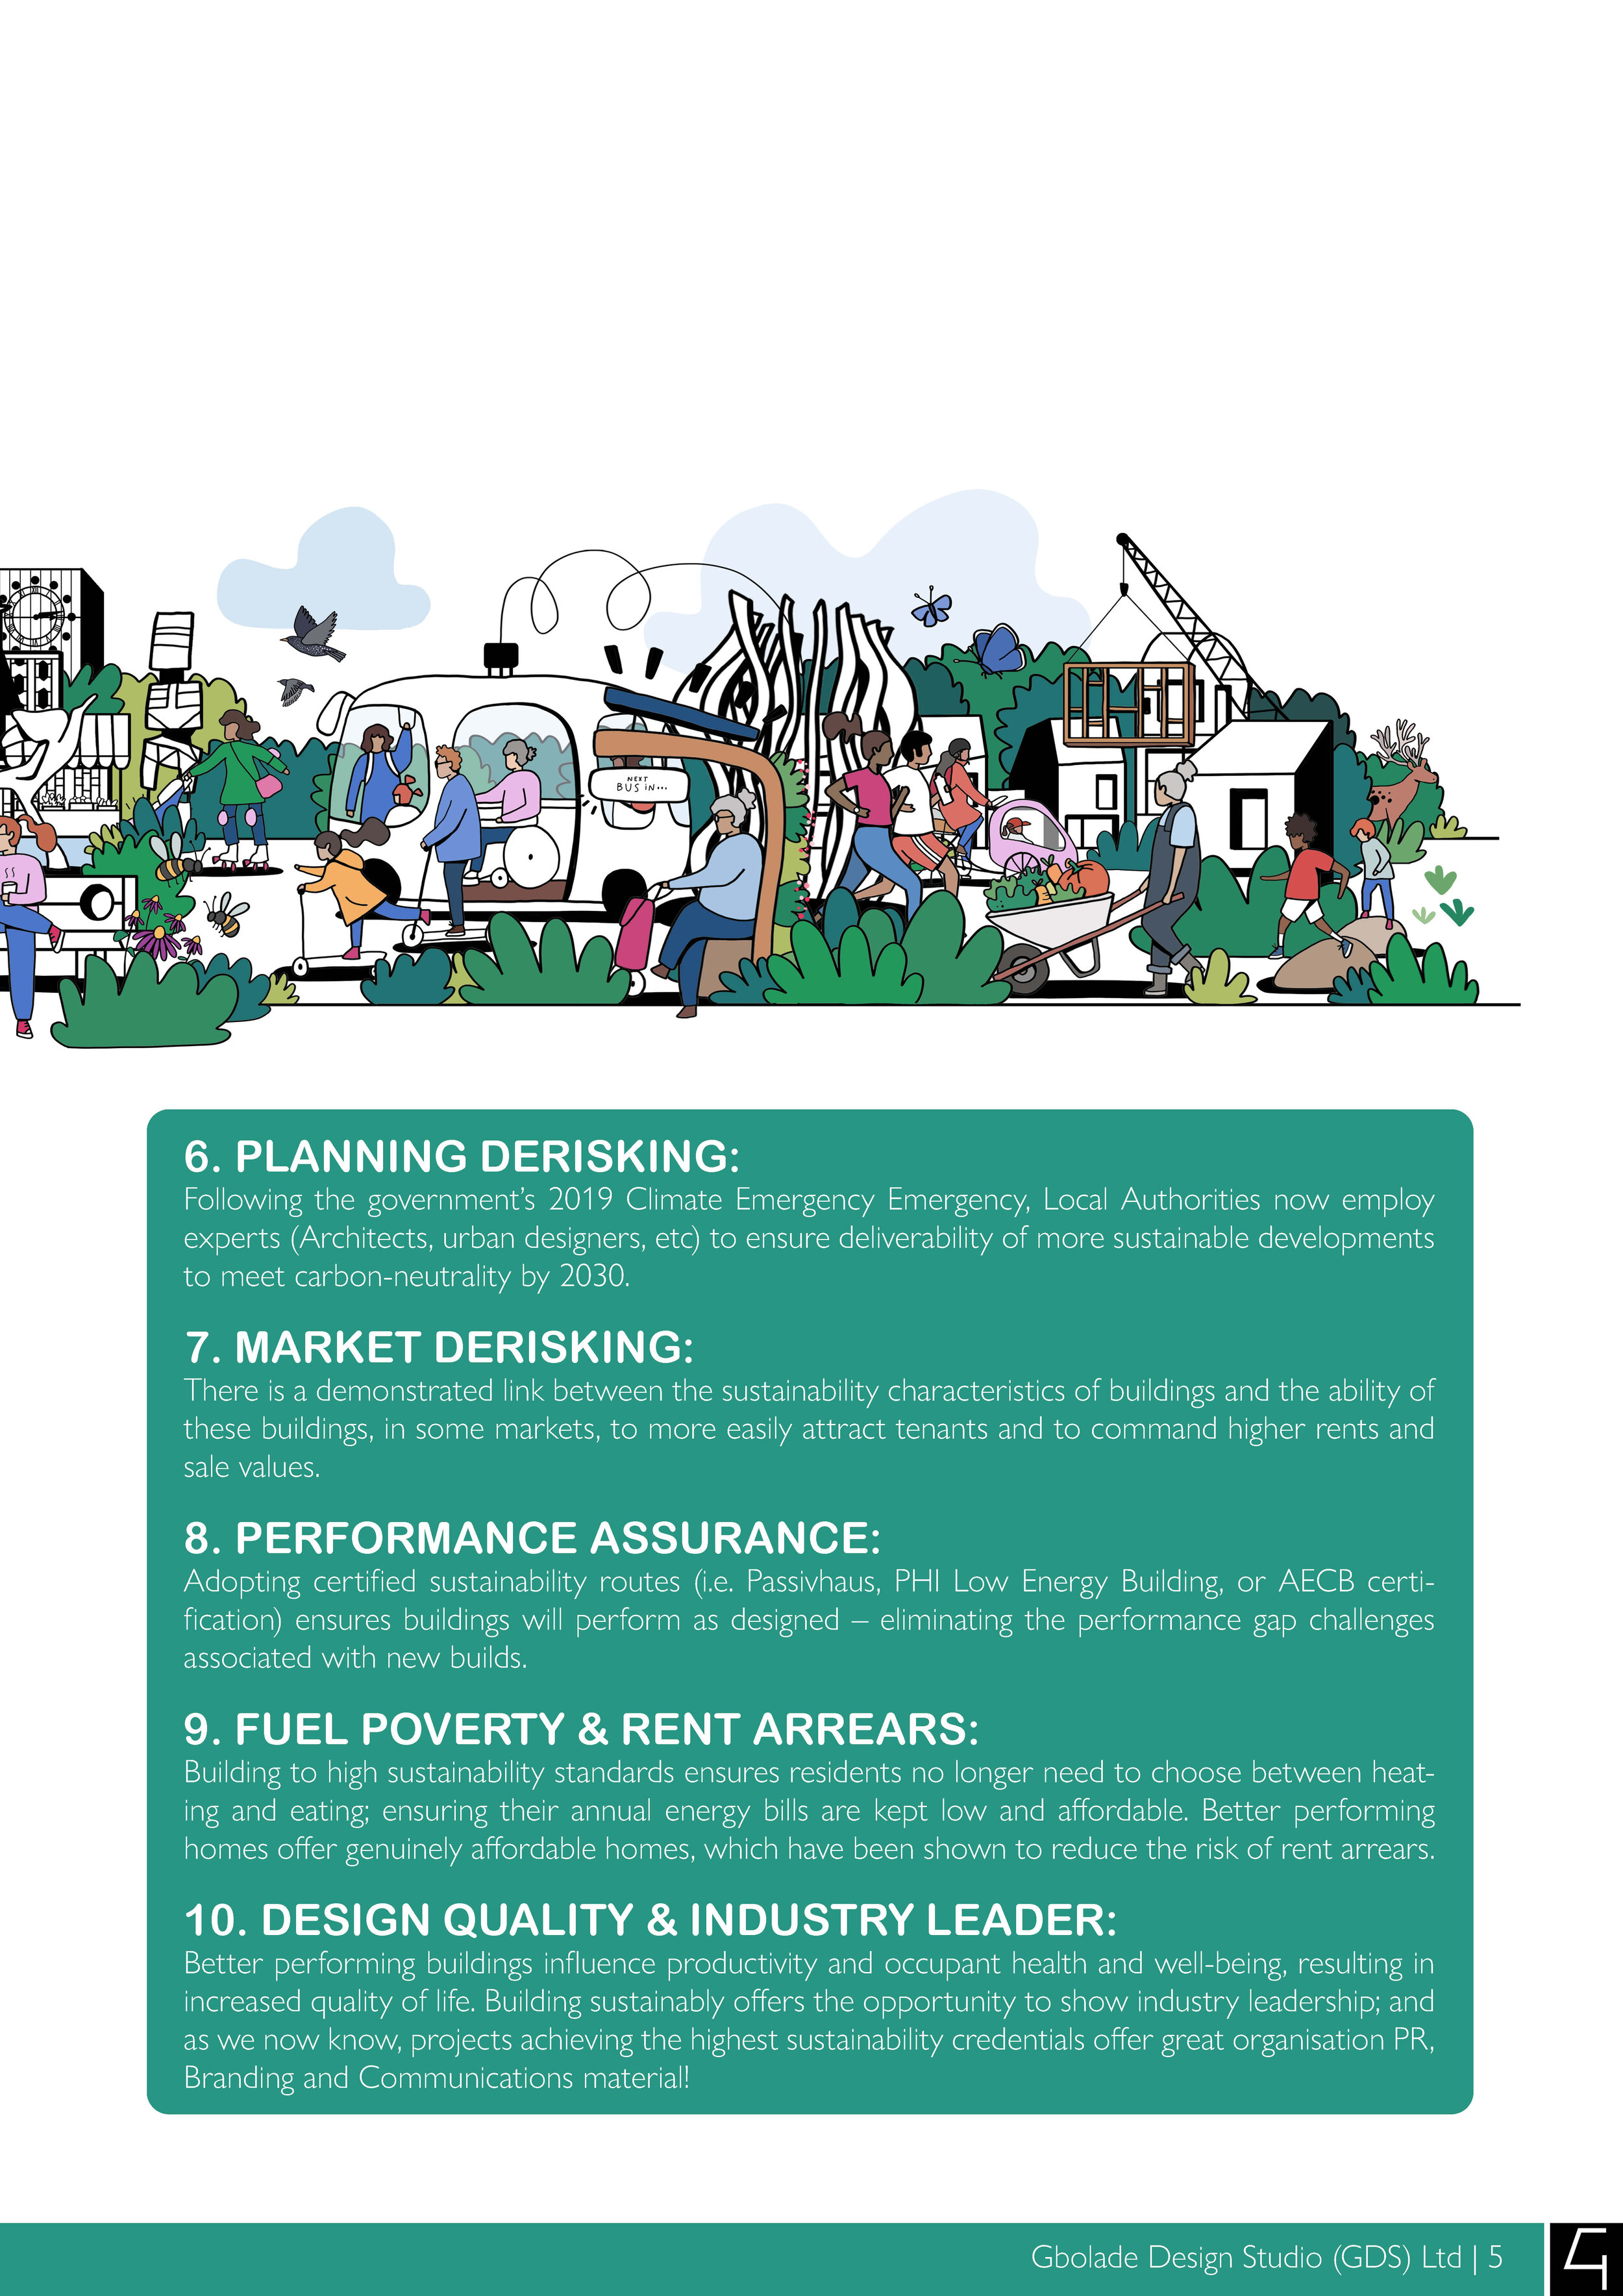 GDS Clients Guide to Sustainability-5.jpg